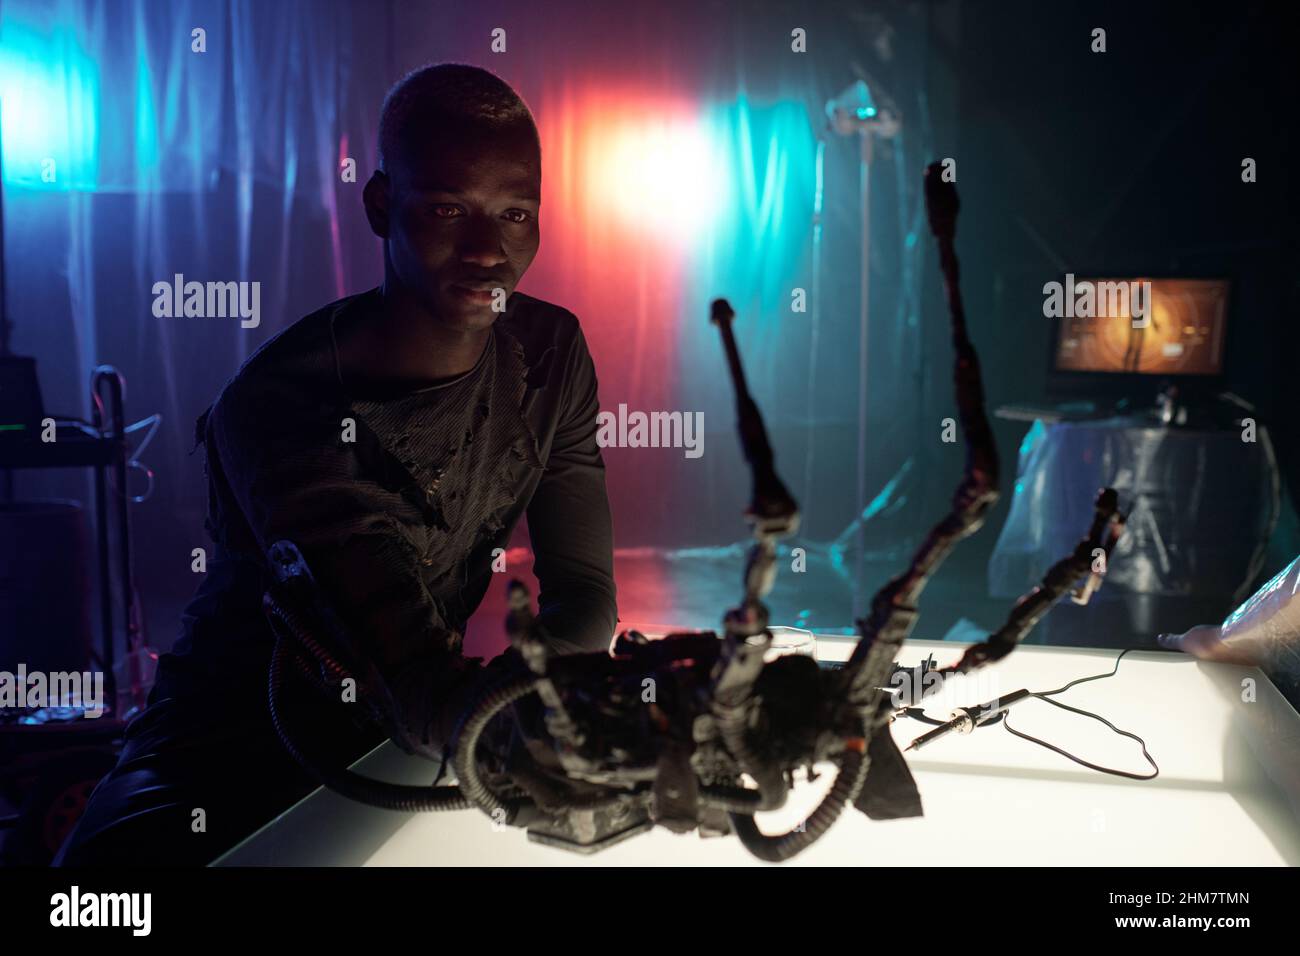 African cyberpunk man sitting at the table and examining his cyber arm in dark room with neon lights Stock Photo